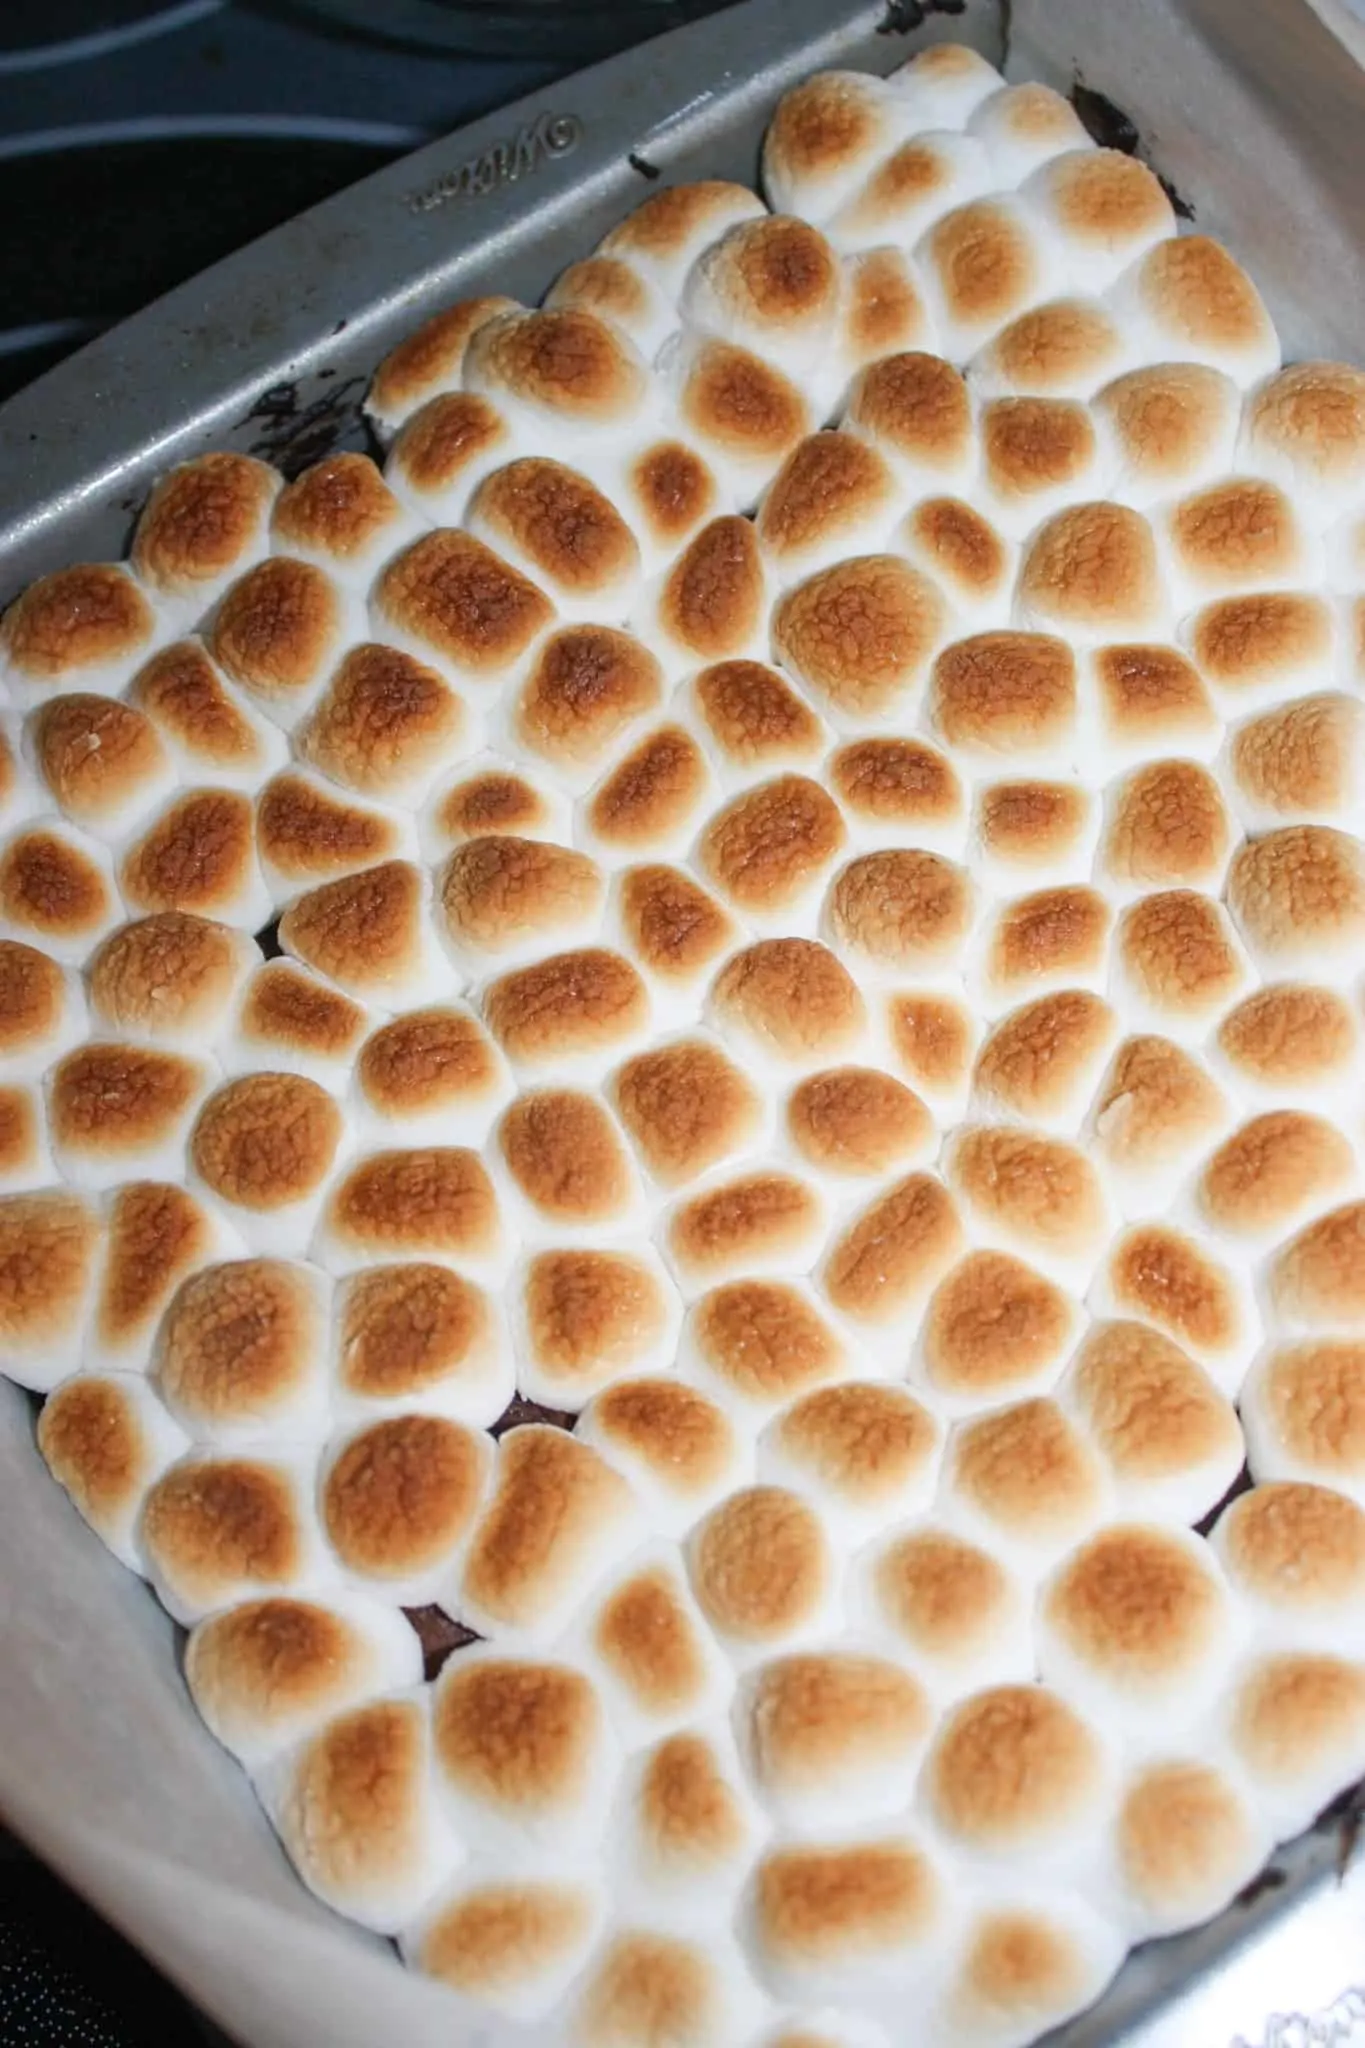 Remove from oven when marshmallows ae golden brown.